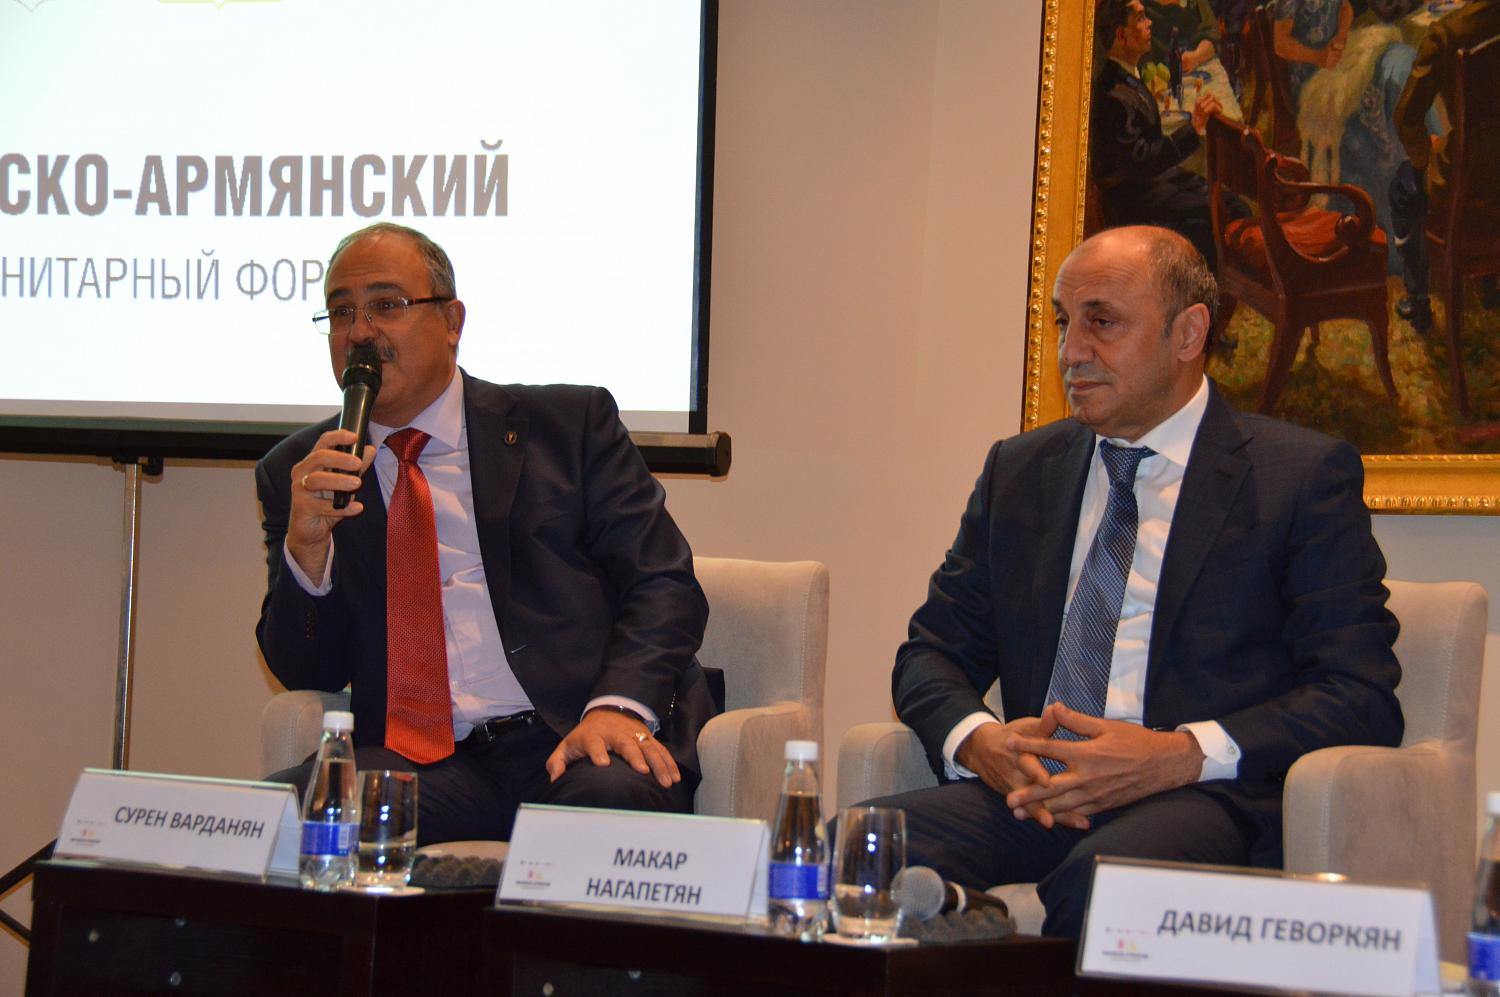 As part of the fair Golden Pomegranate the humanitarian Moscow-Armenian forum was conducted